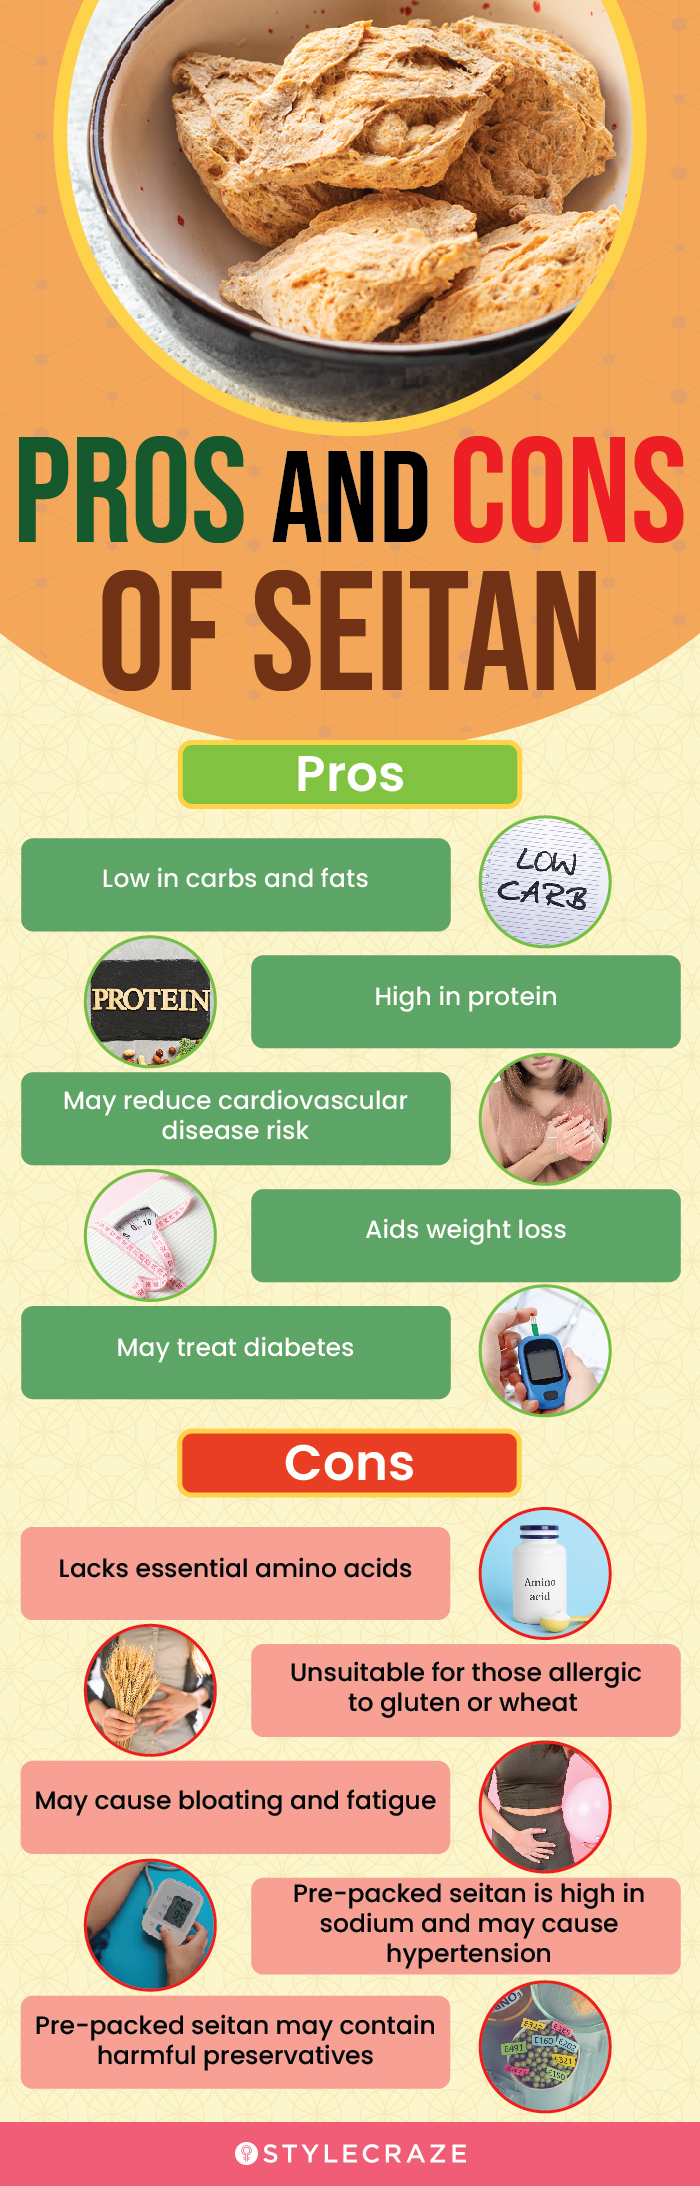 pros and cons of seitan (infographic)